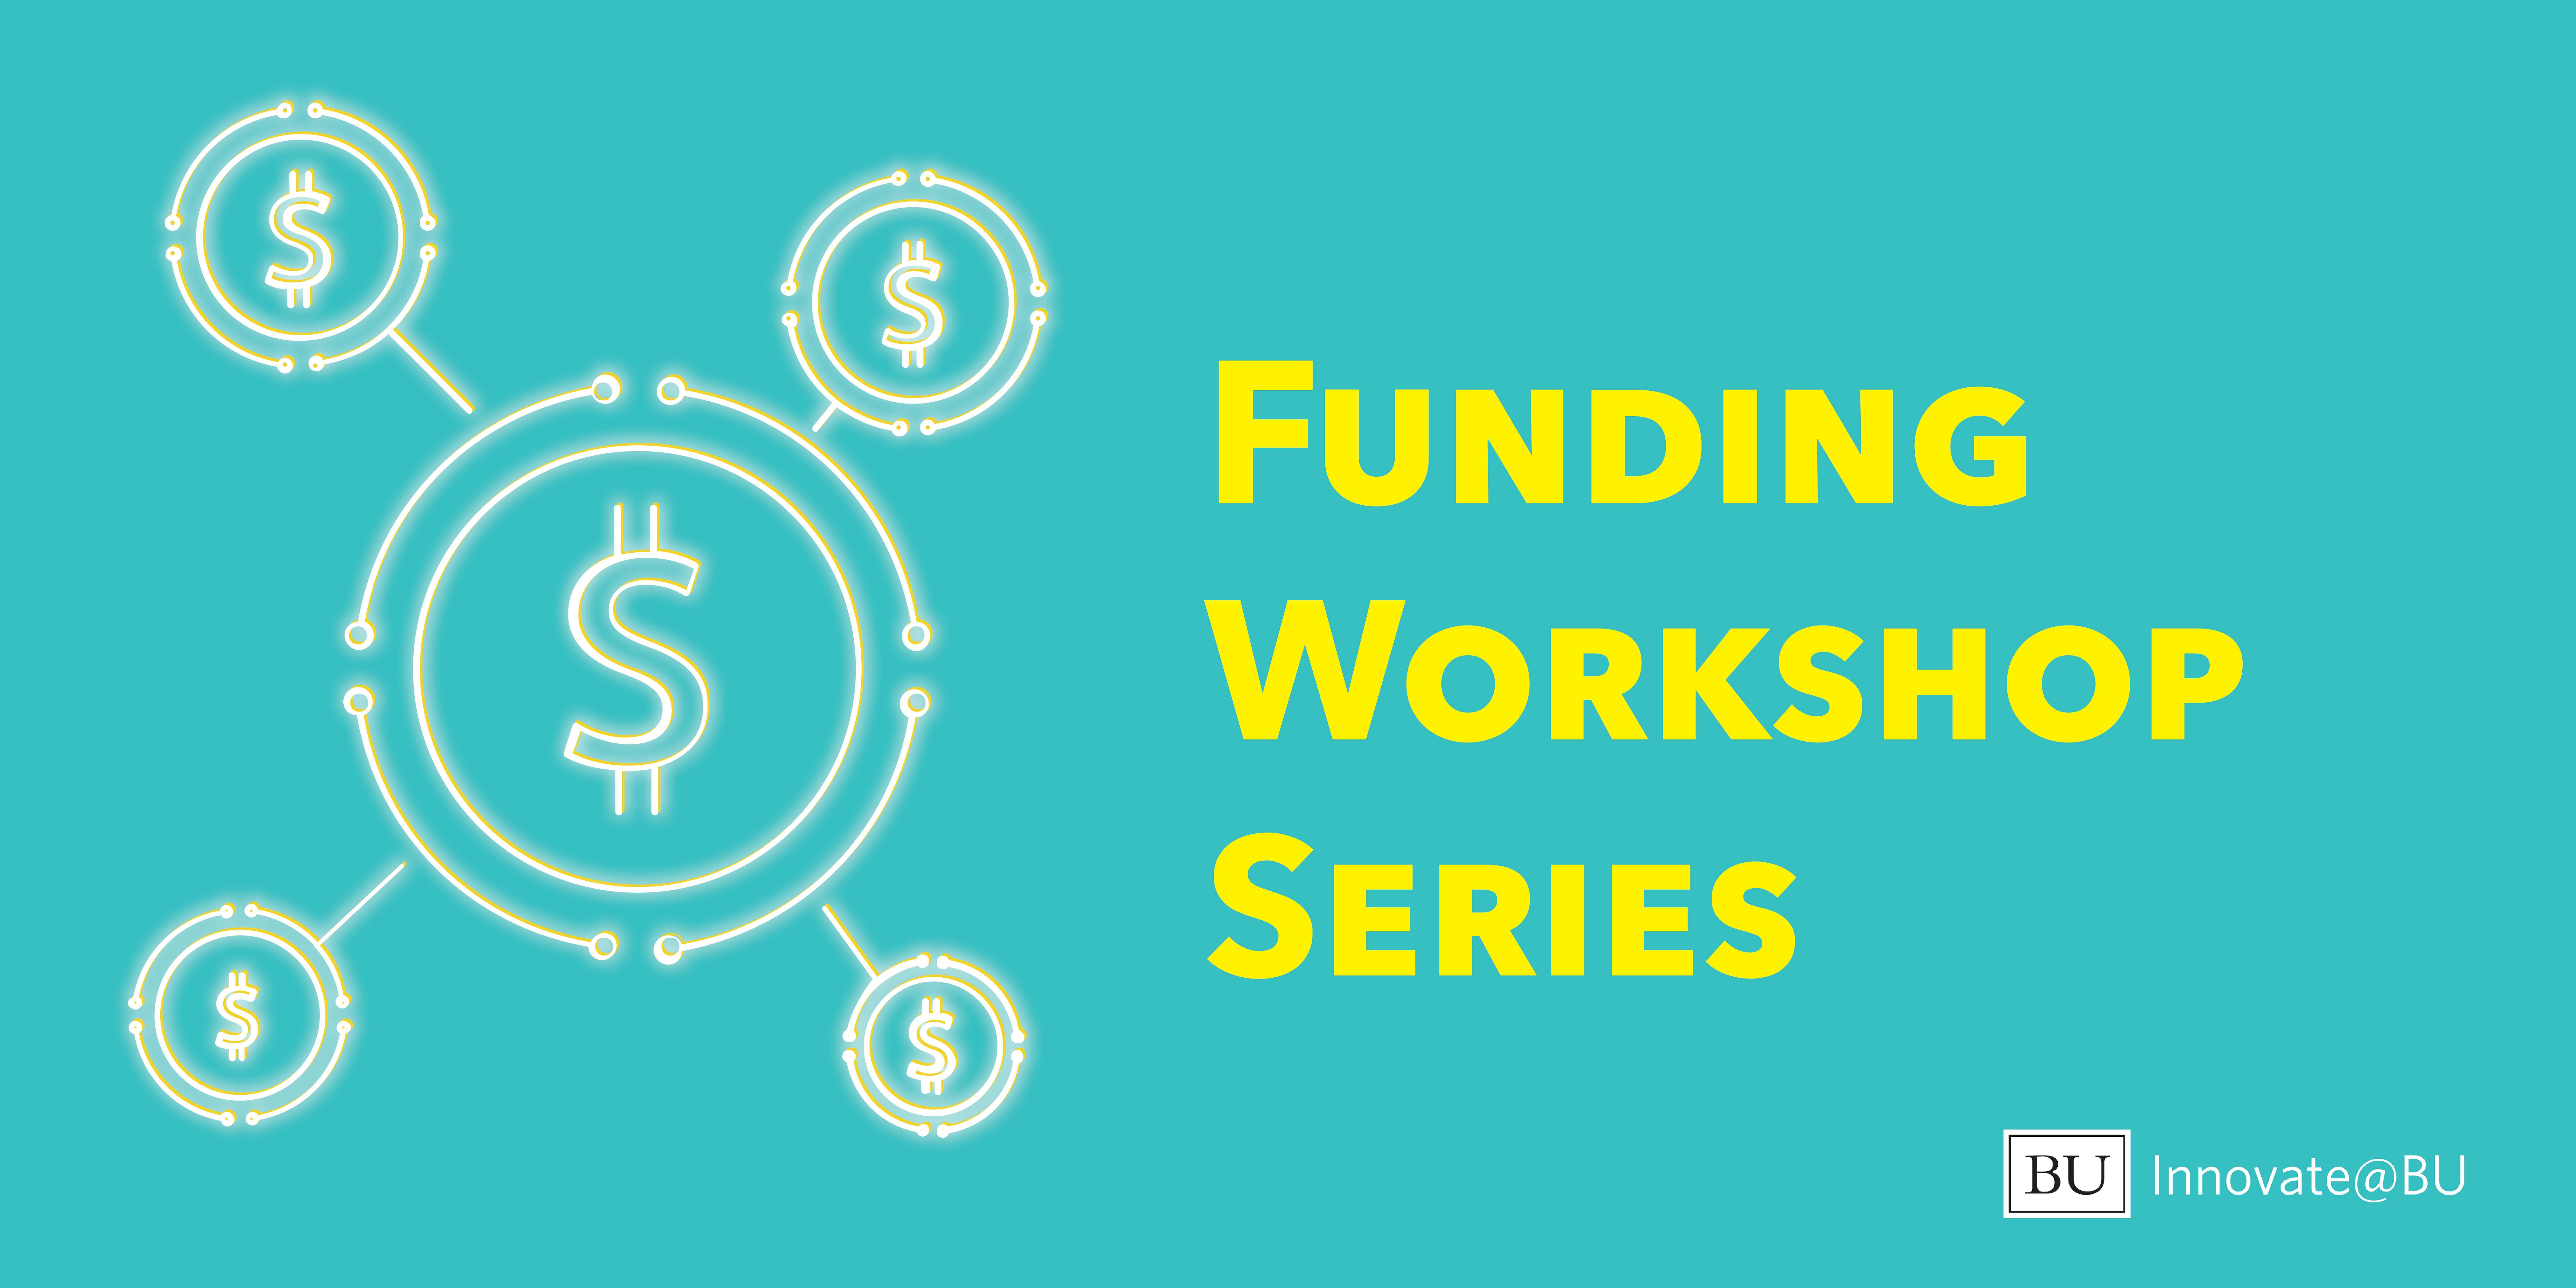 Funding Workshop Series: Four Ways to Raise Money for Your Idea